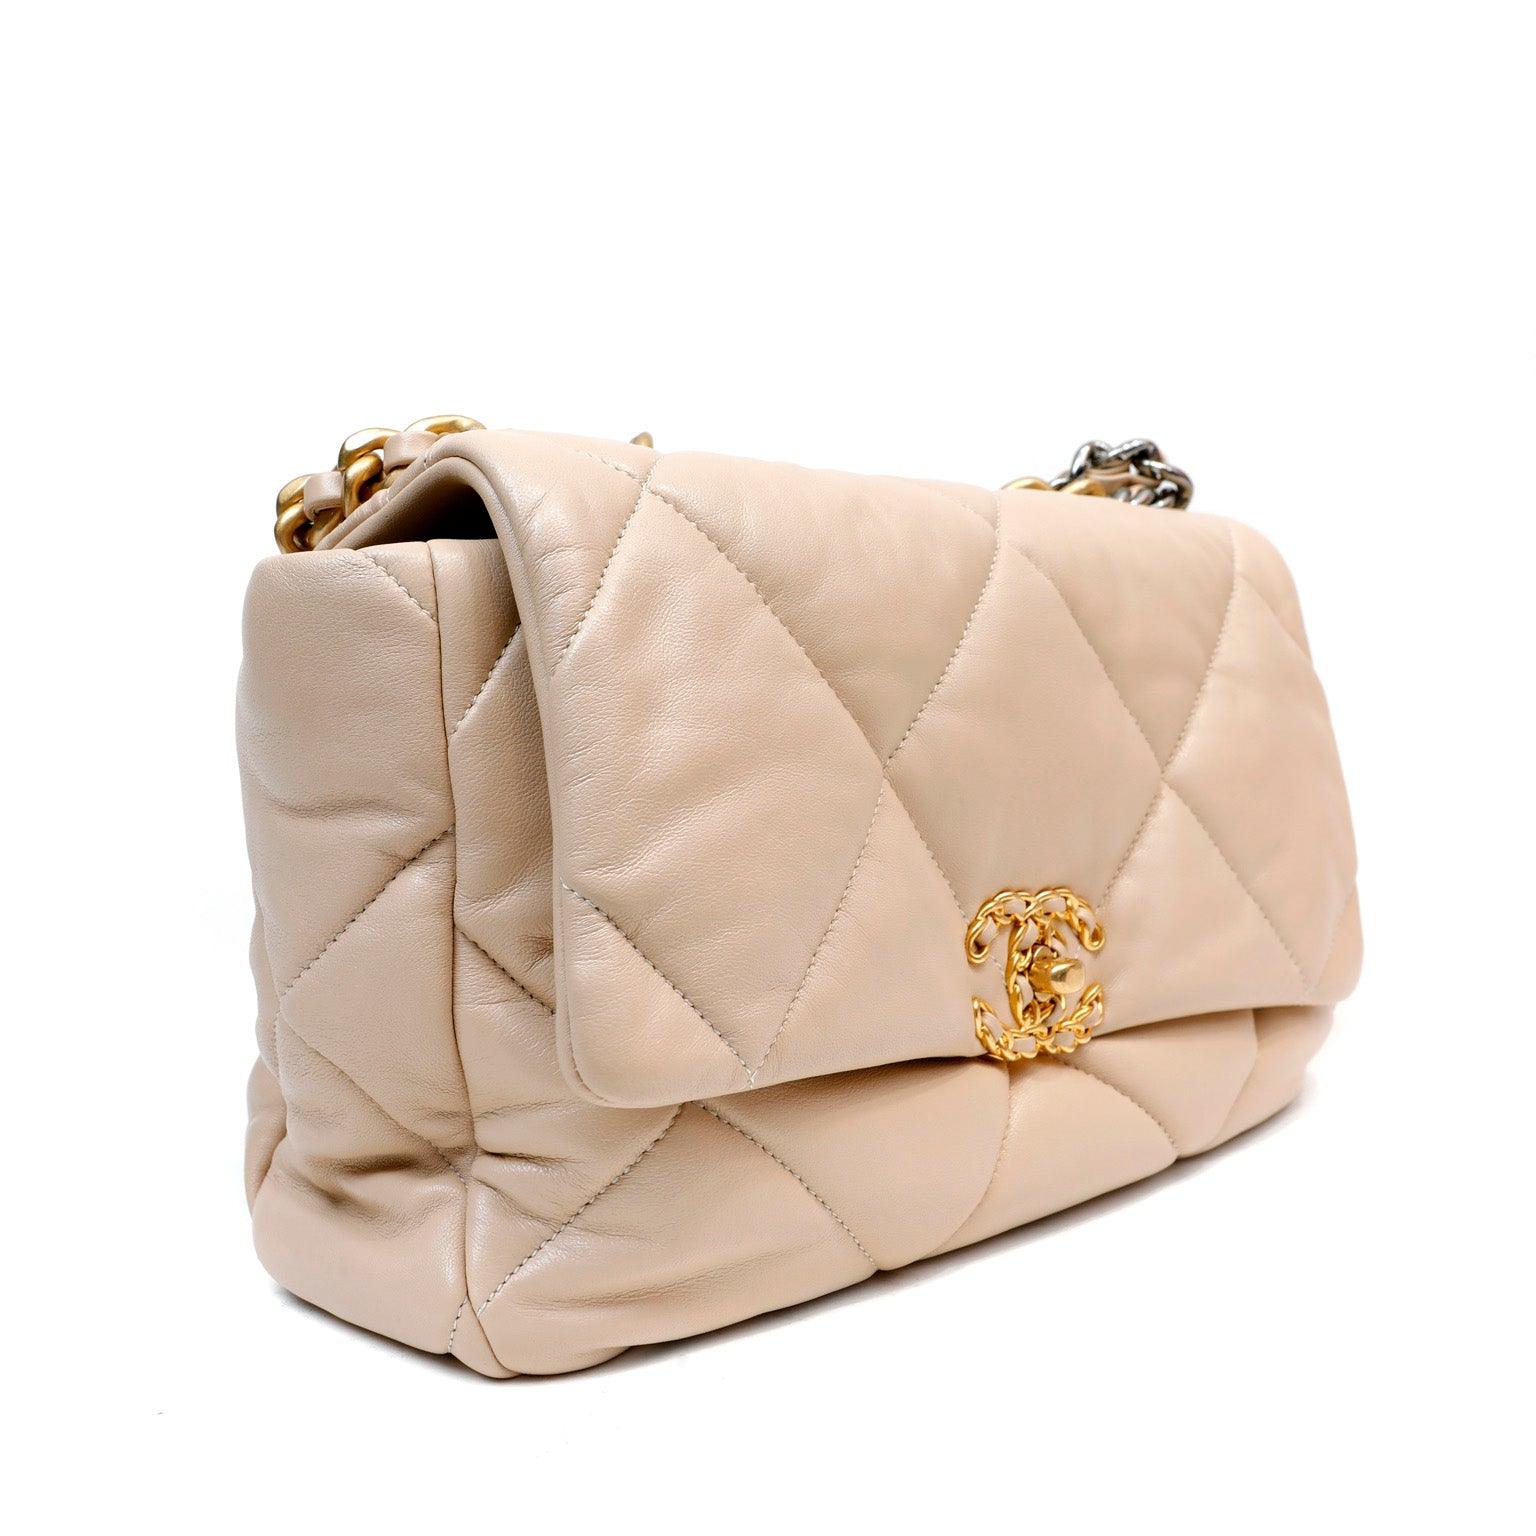 Get your hands on the stunning Chanel Beige 19 Bag with Mixed